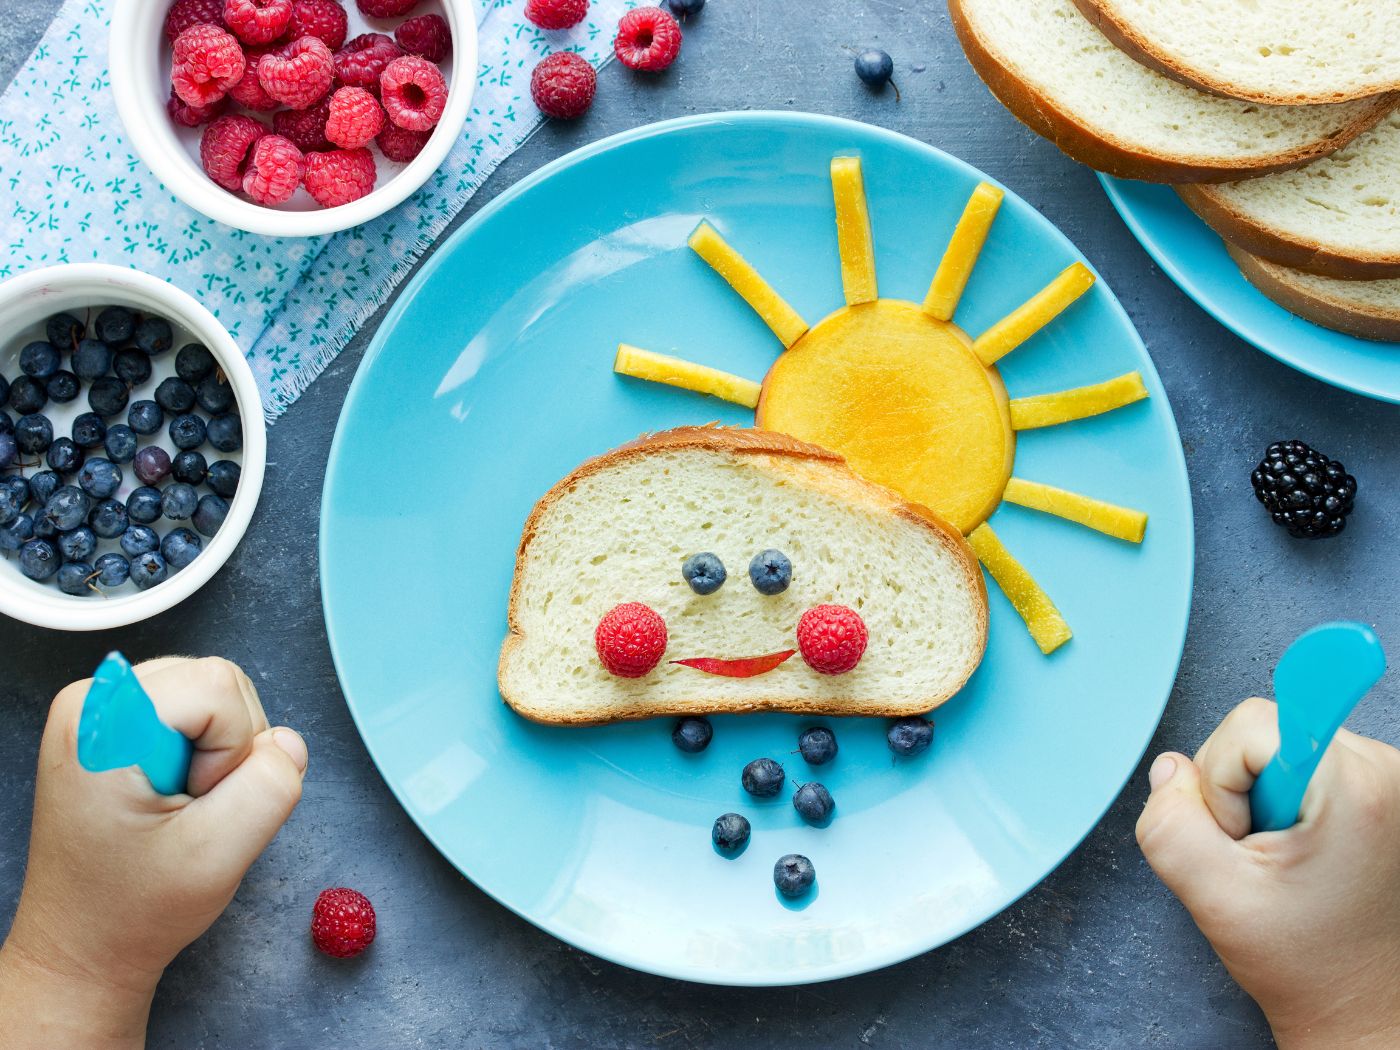 Tasty & Easy Recipes For Kids To Try in the Year 2023